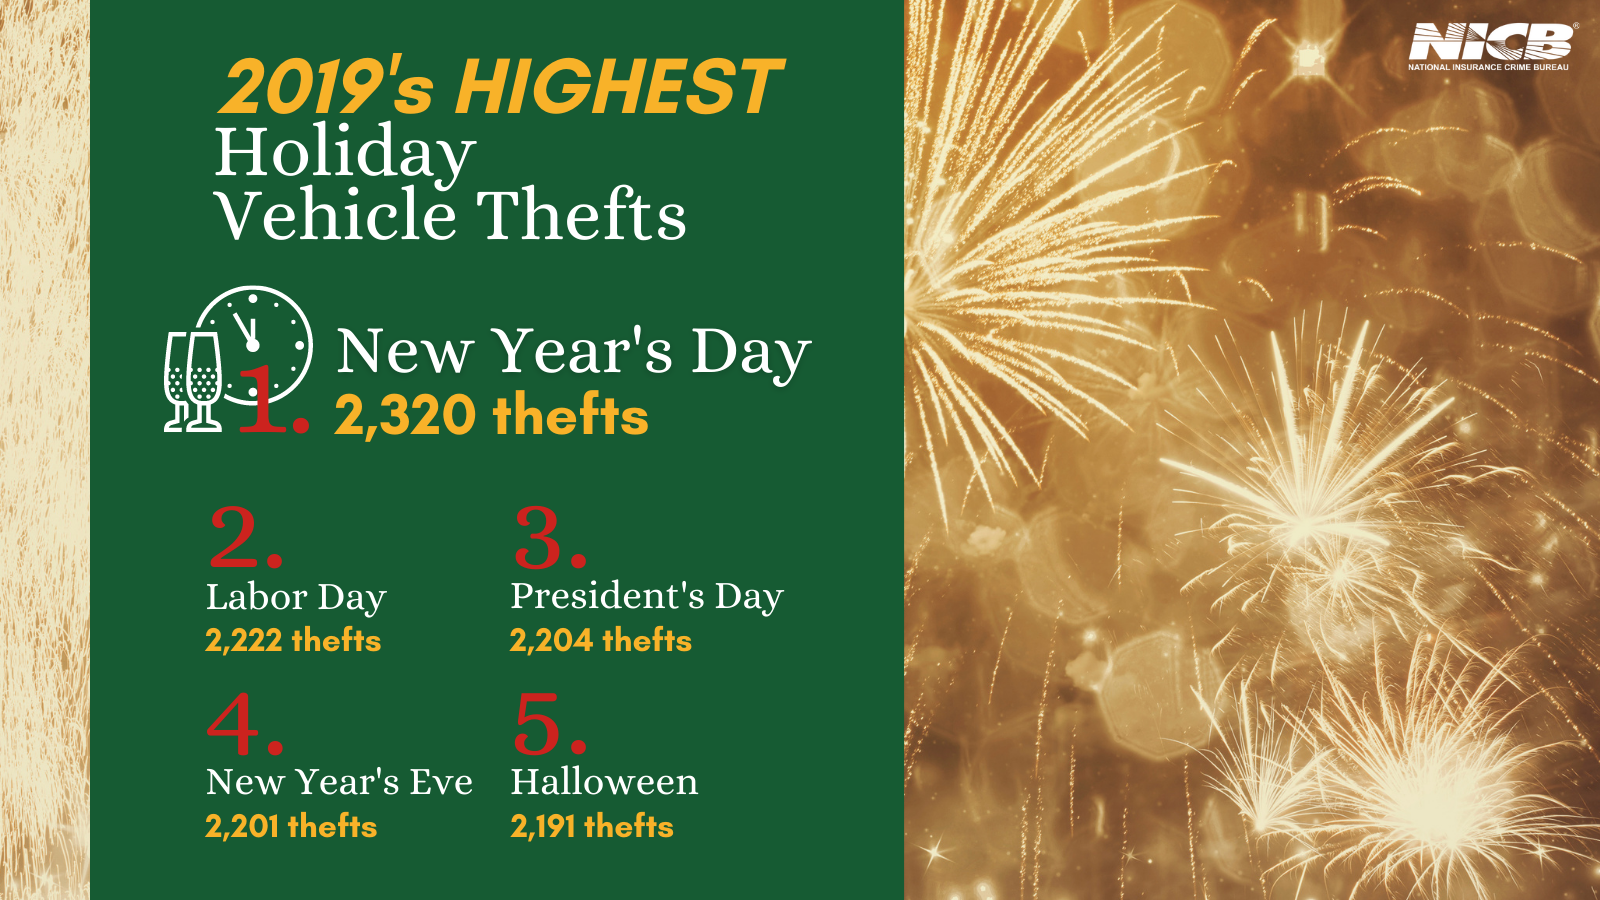 Holiday Vehicle Thefts 2019